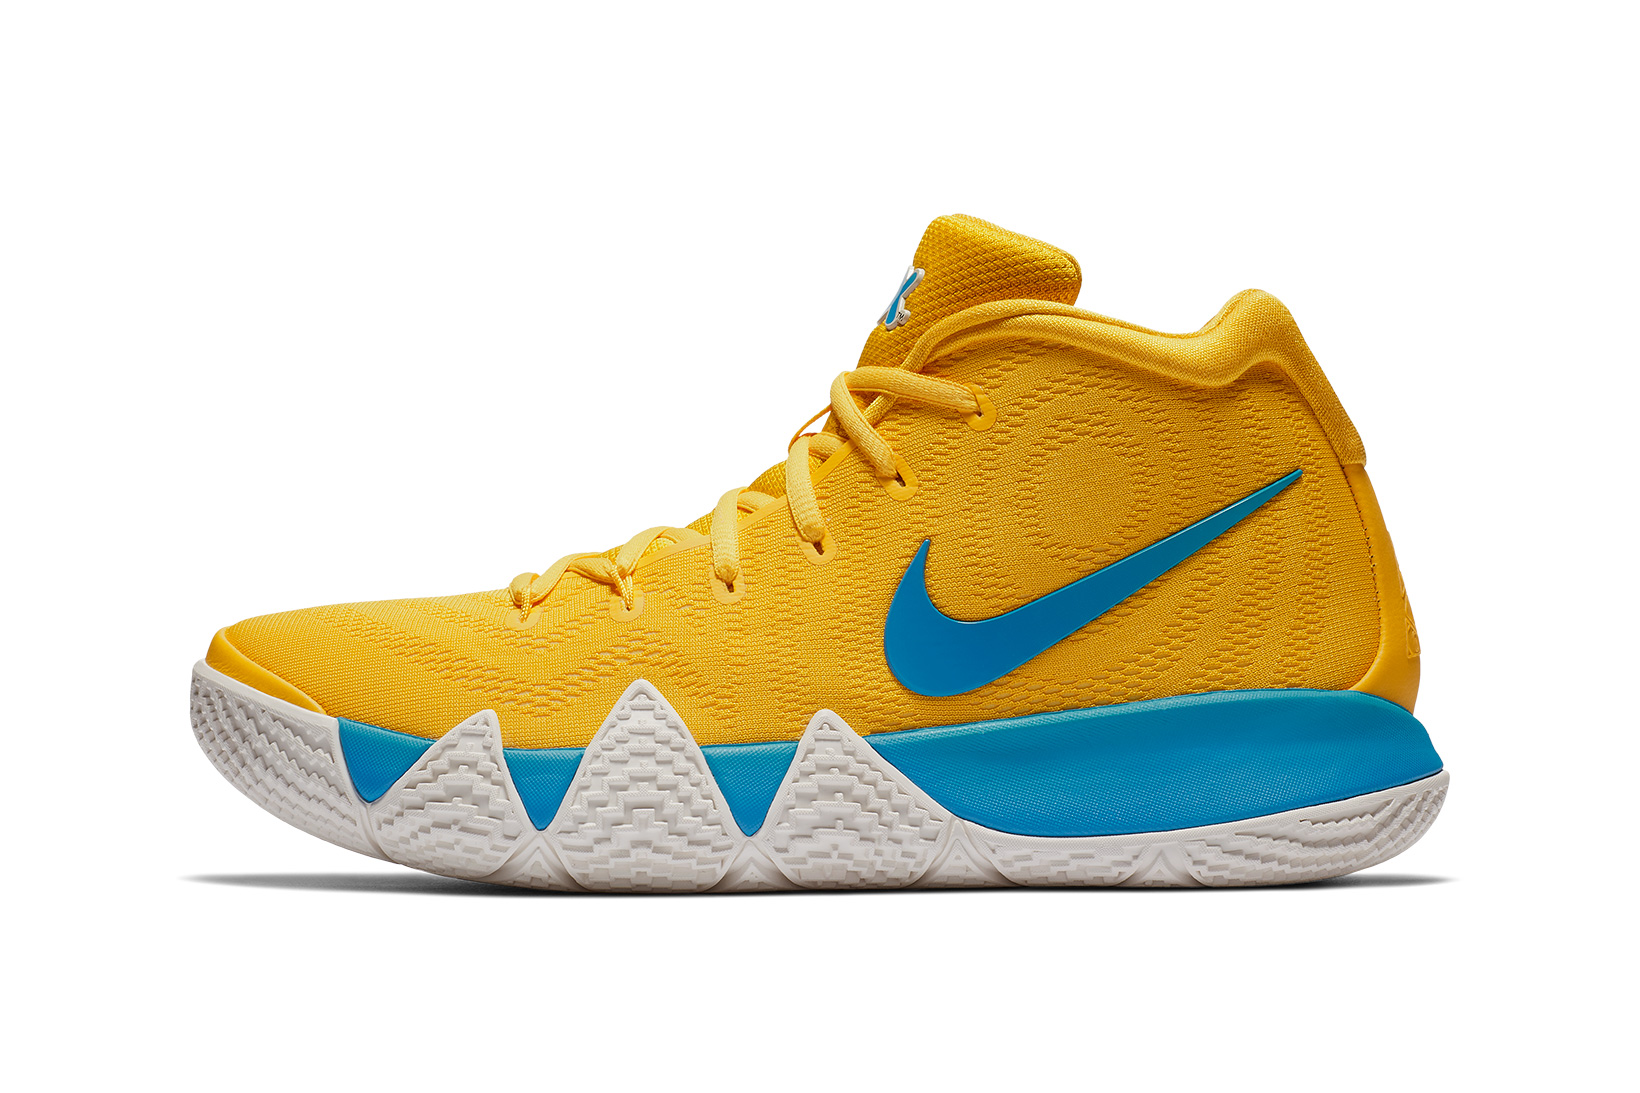 Nike Kyrie Cereal Pack Drops Hypebeast | vlr.eng.br